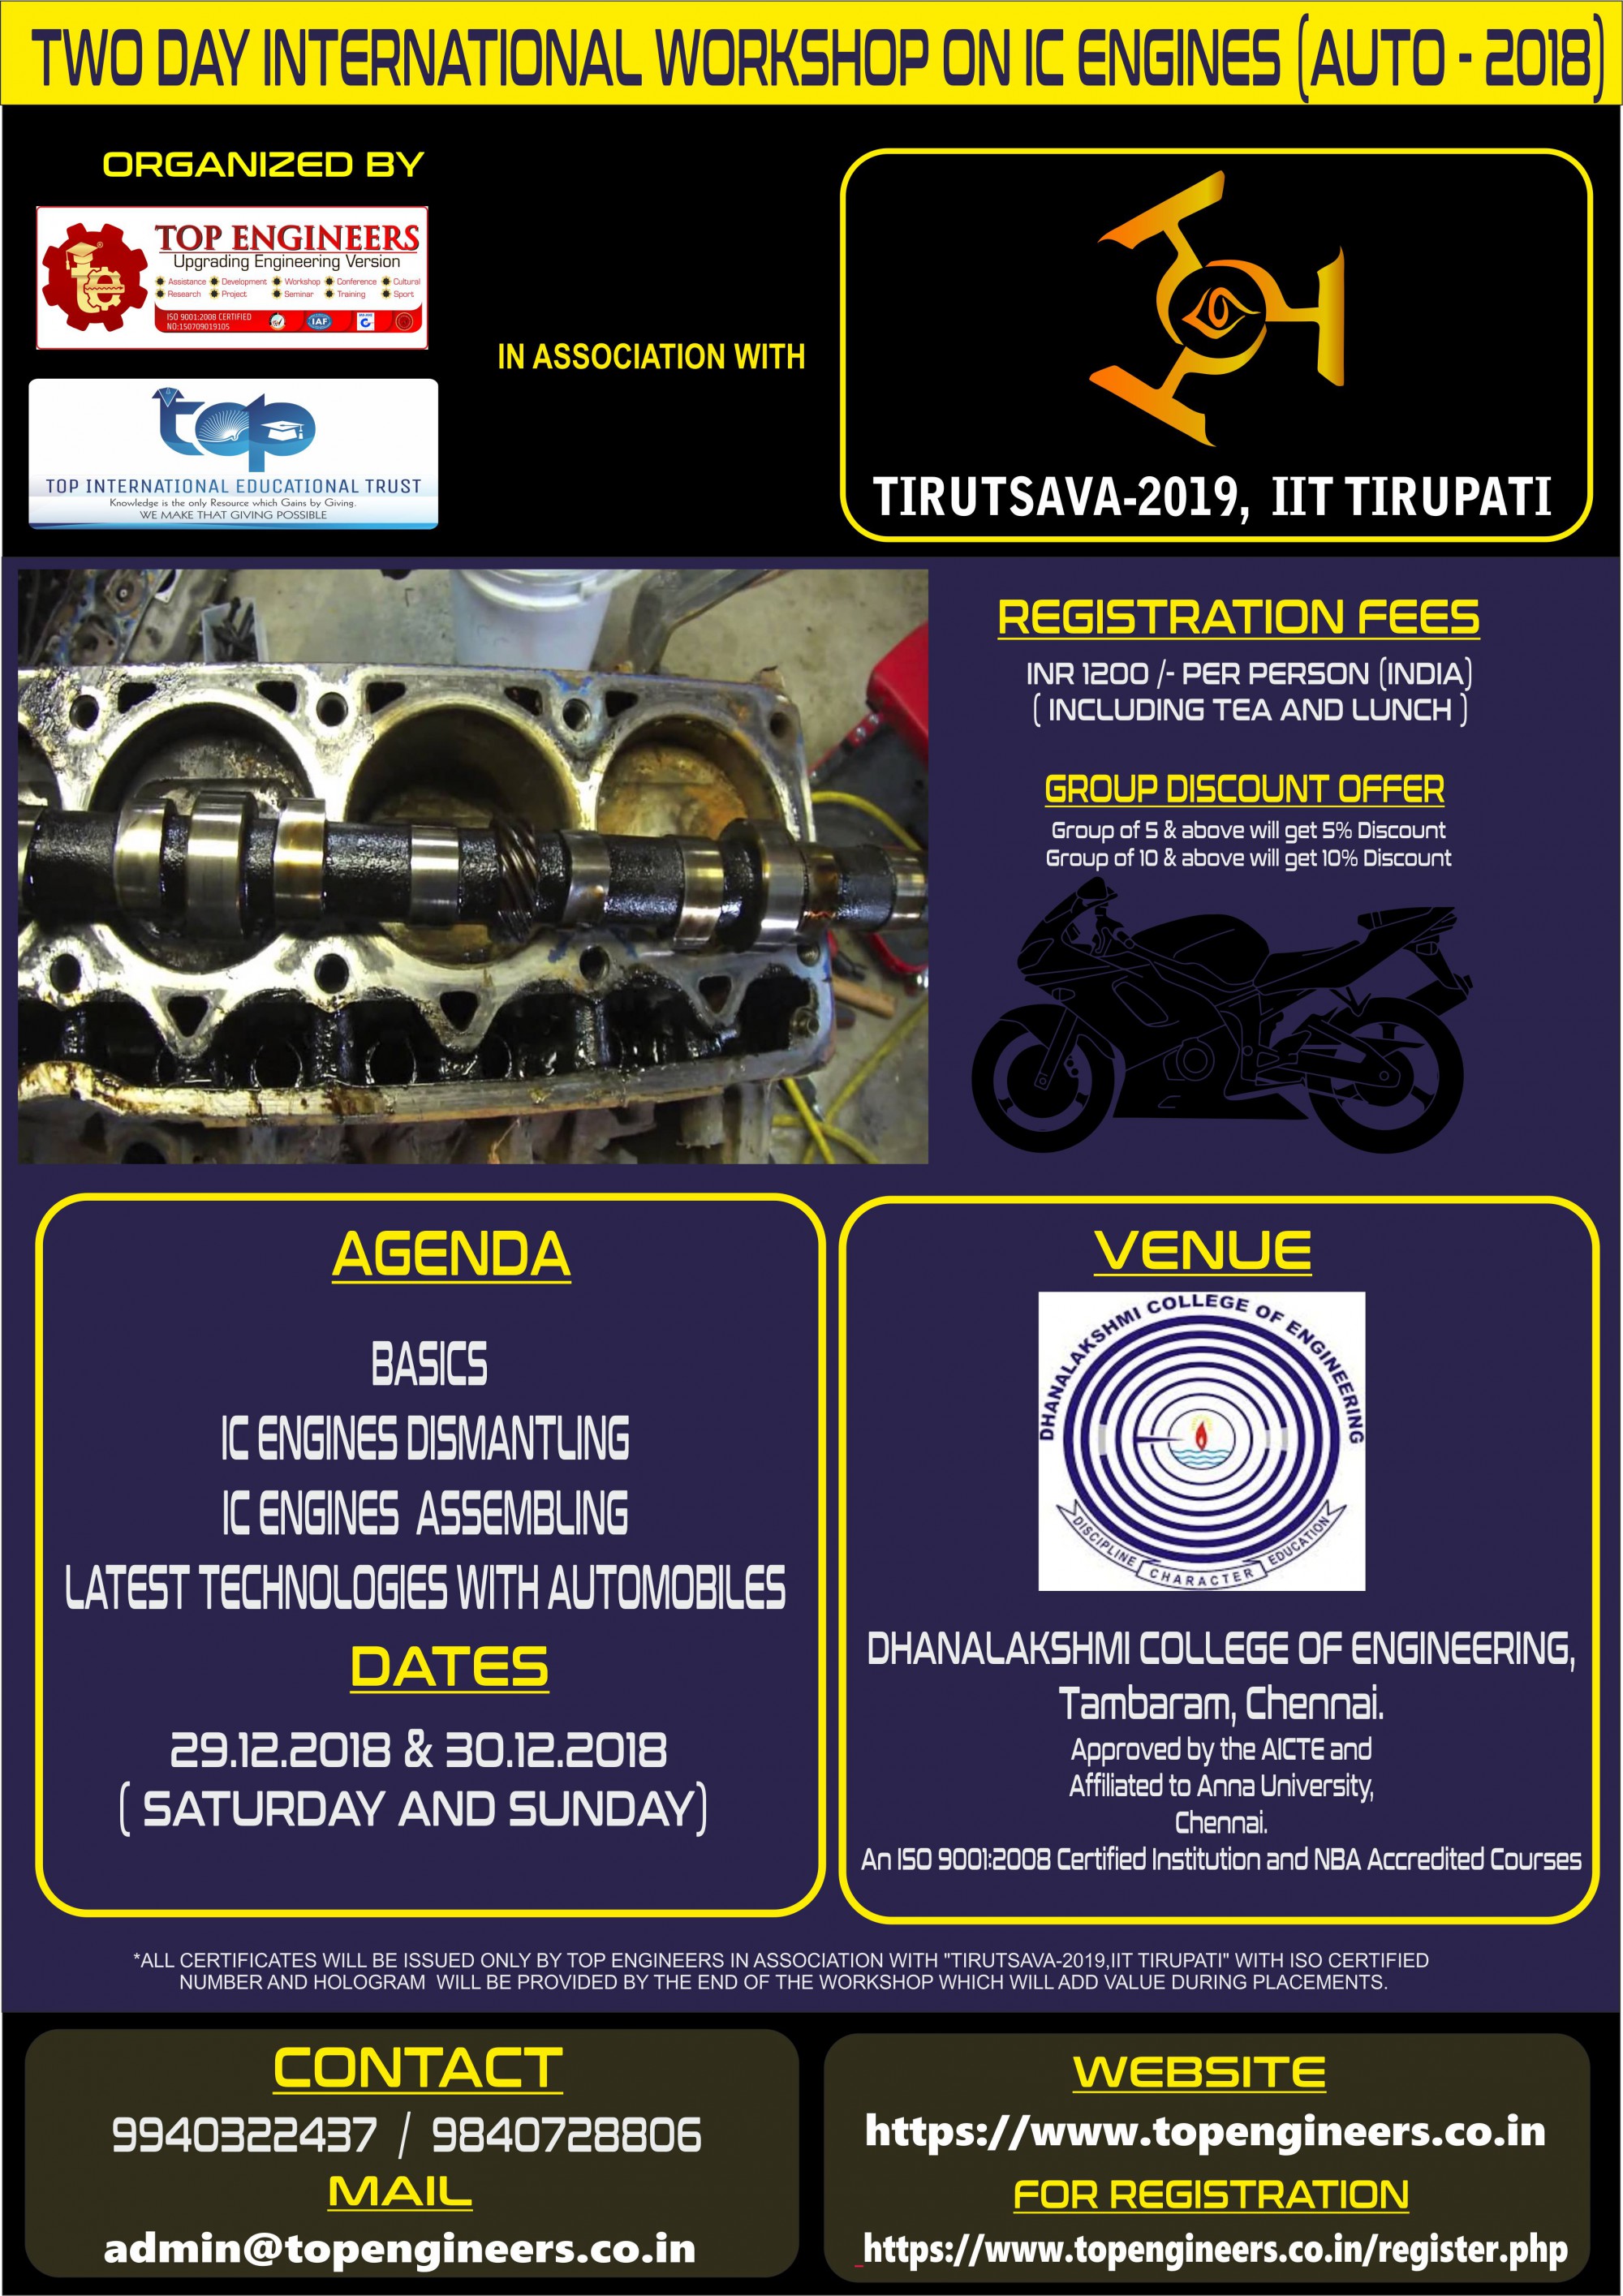 Two Day International Workshop on IC Engines Auto 2018